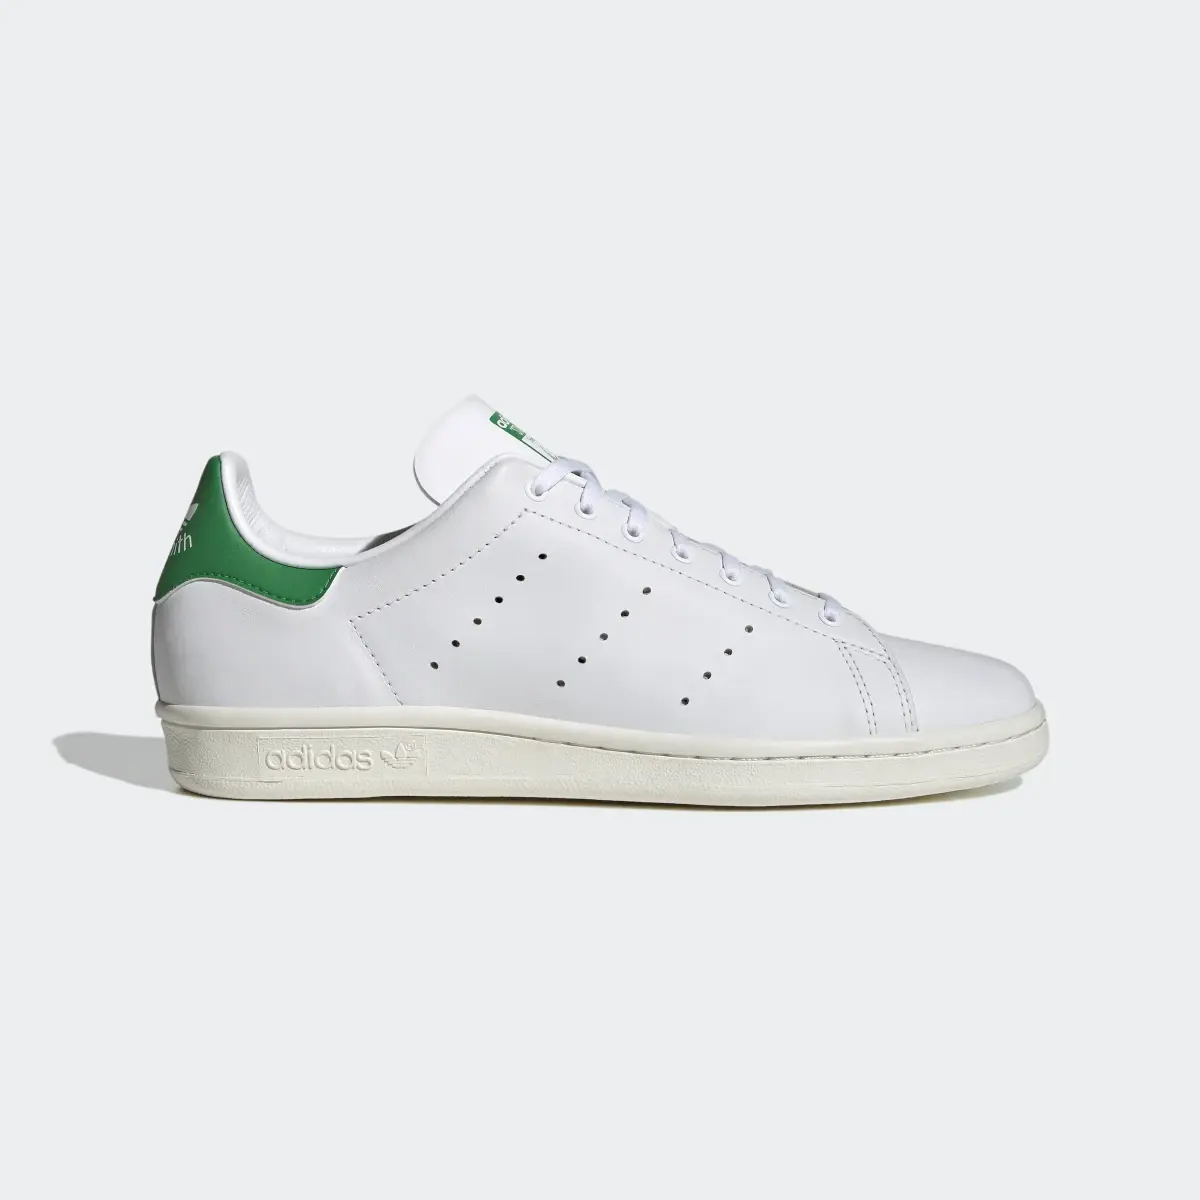 Adidas Stan Smith 80s Shoes. 2